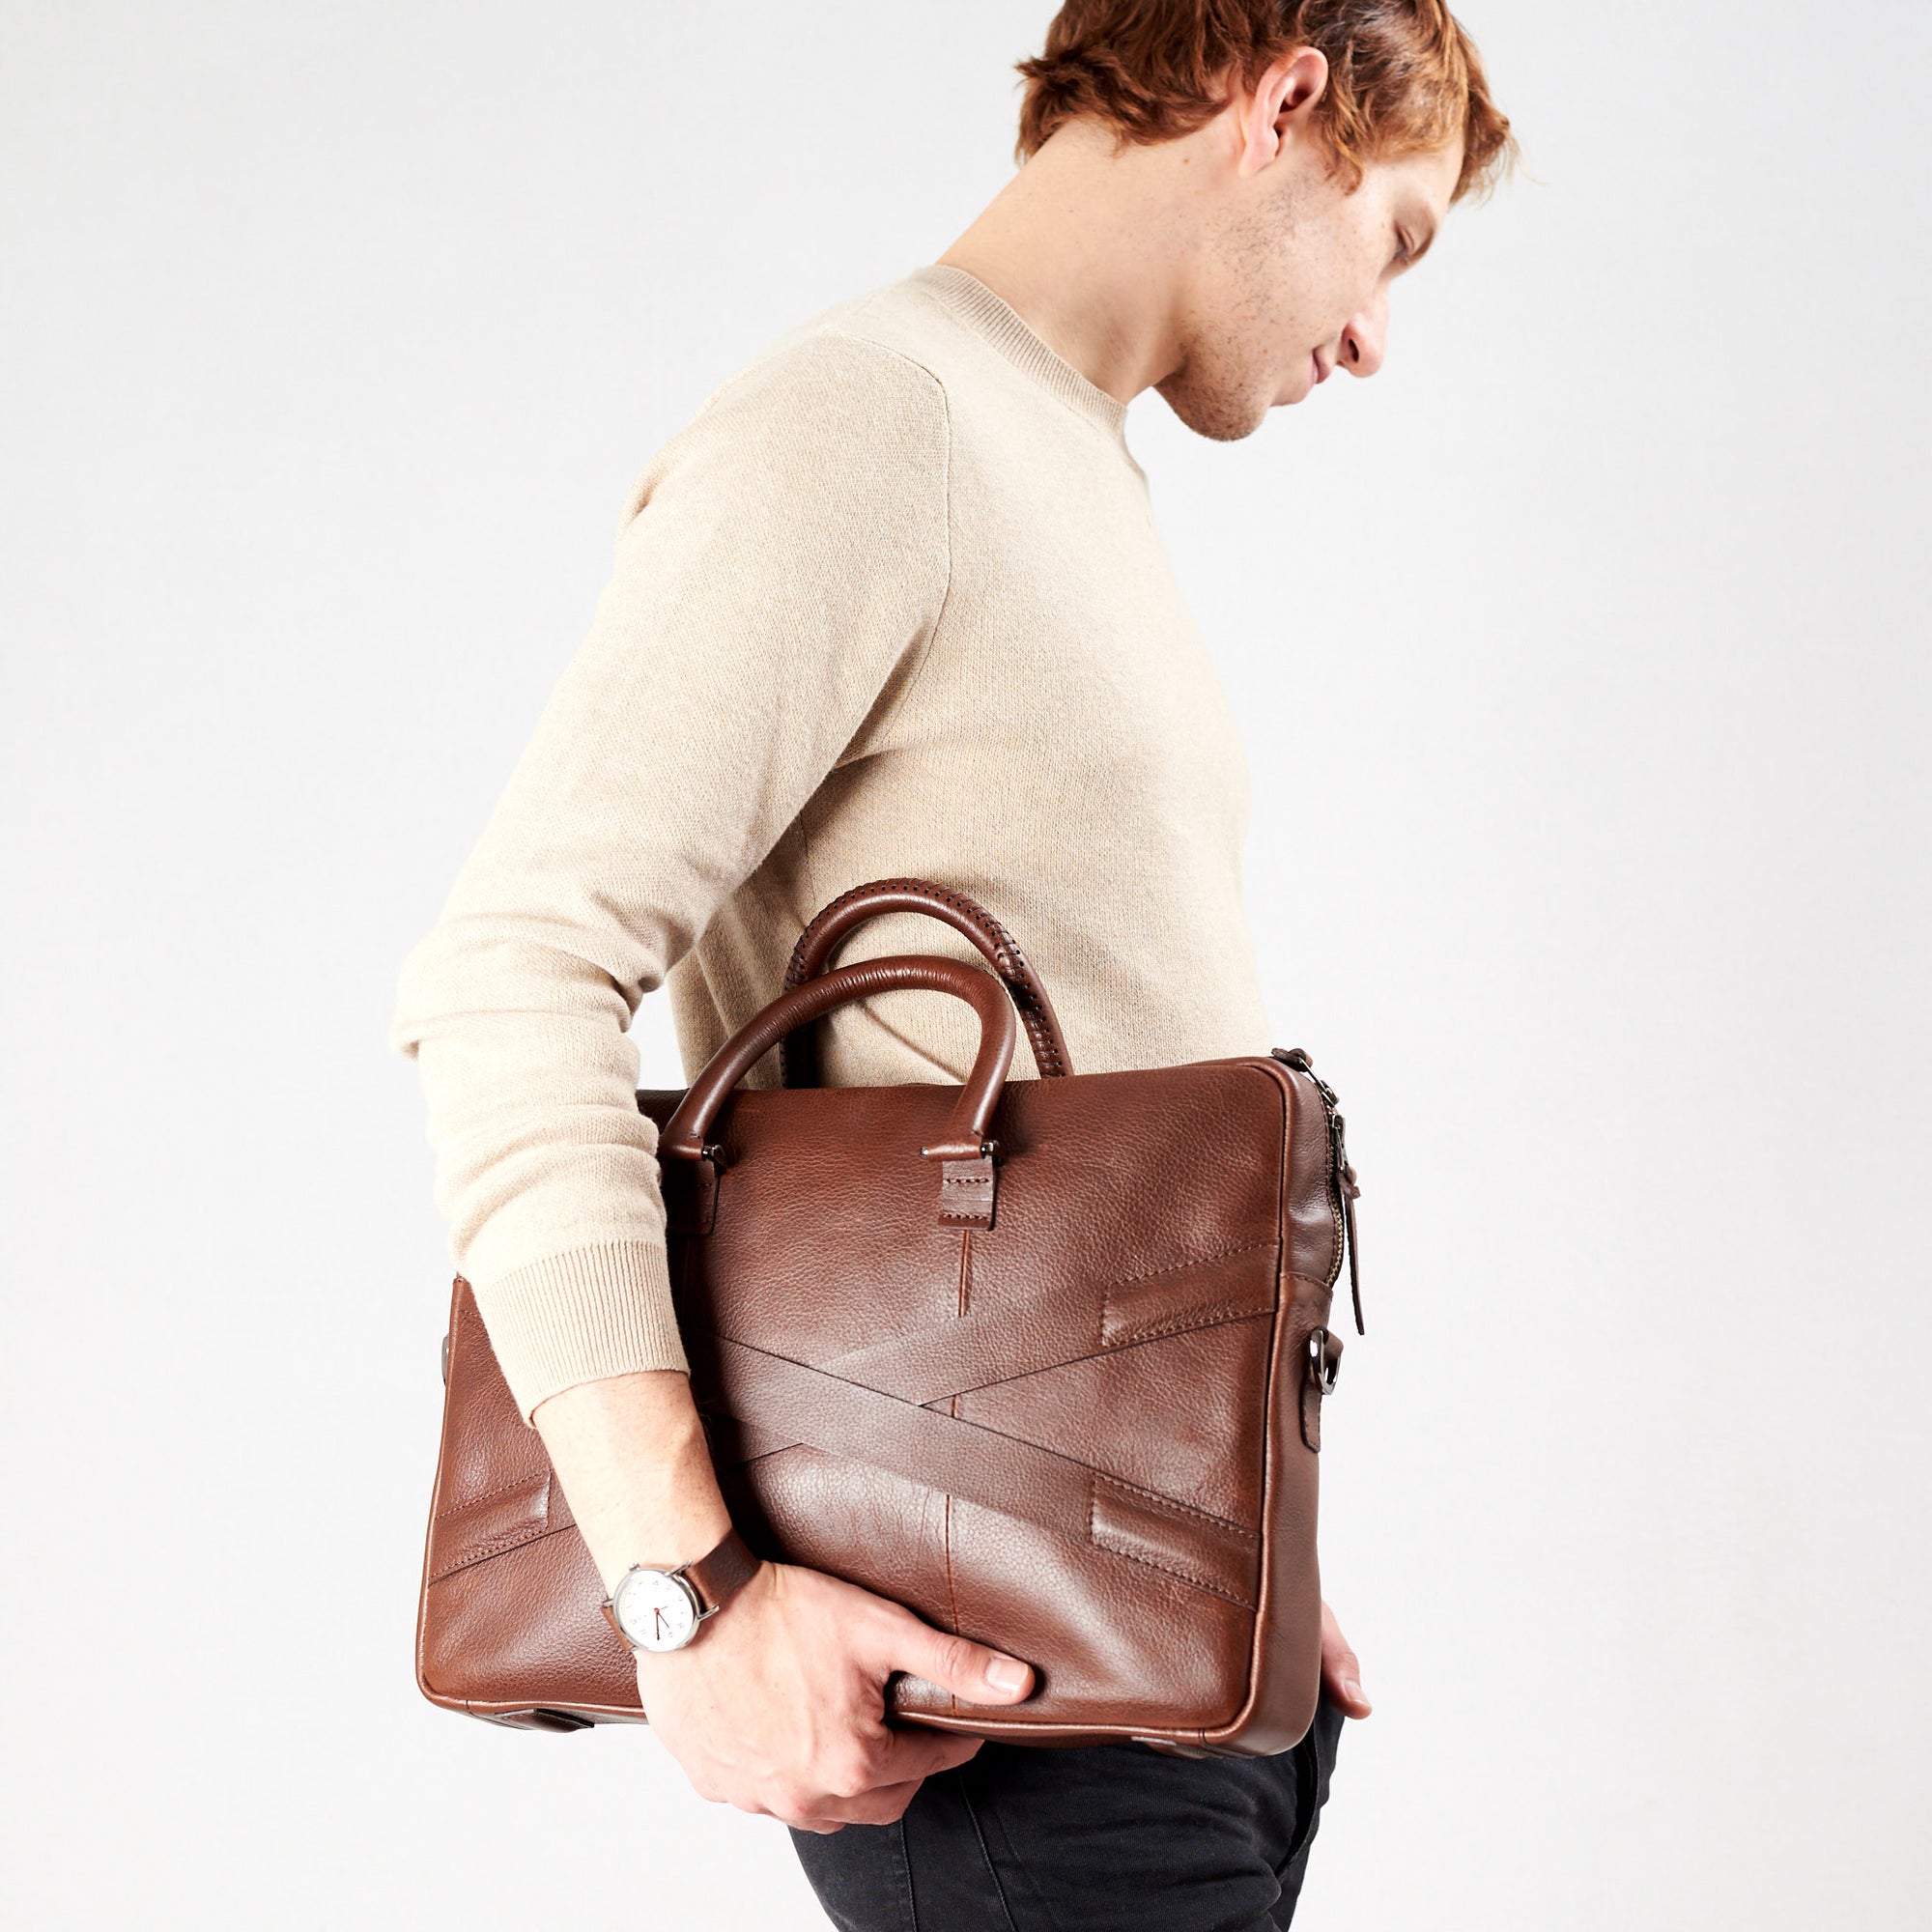 Style model holding crossbody with hands. Brown leather briefcase laptop bag for men. Gazeli laptop briefcase by Capra Leather.